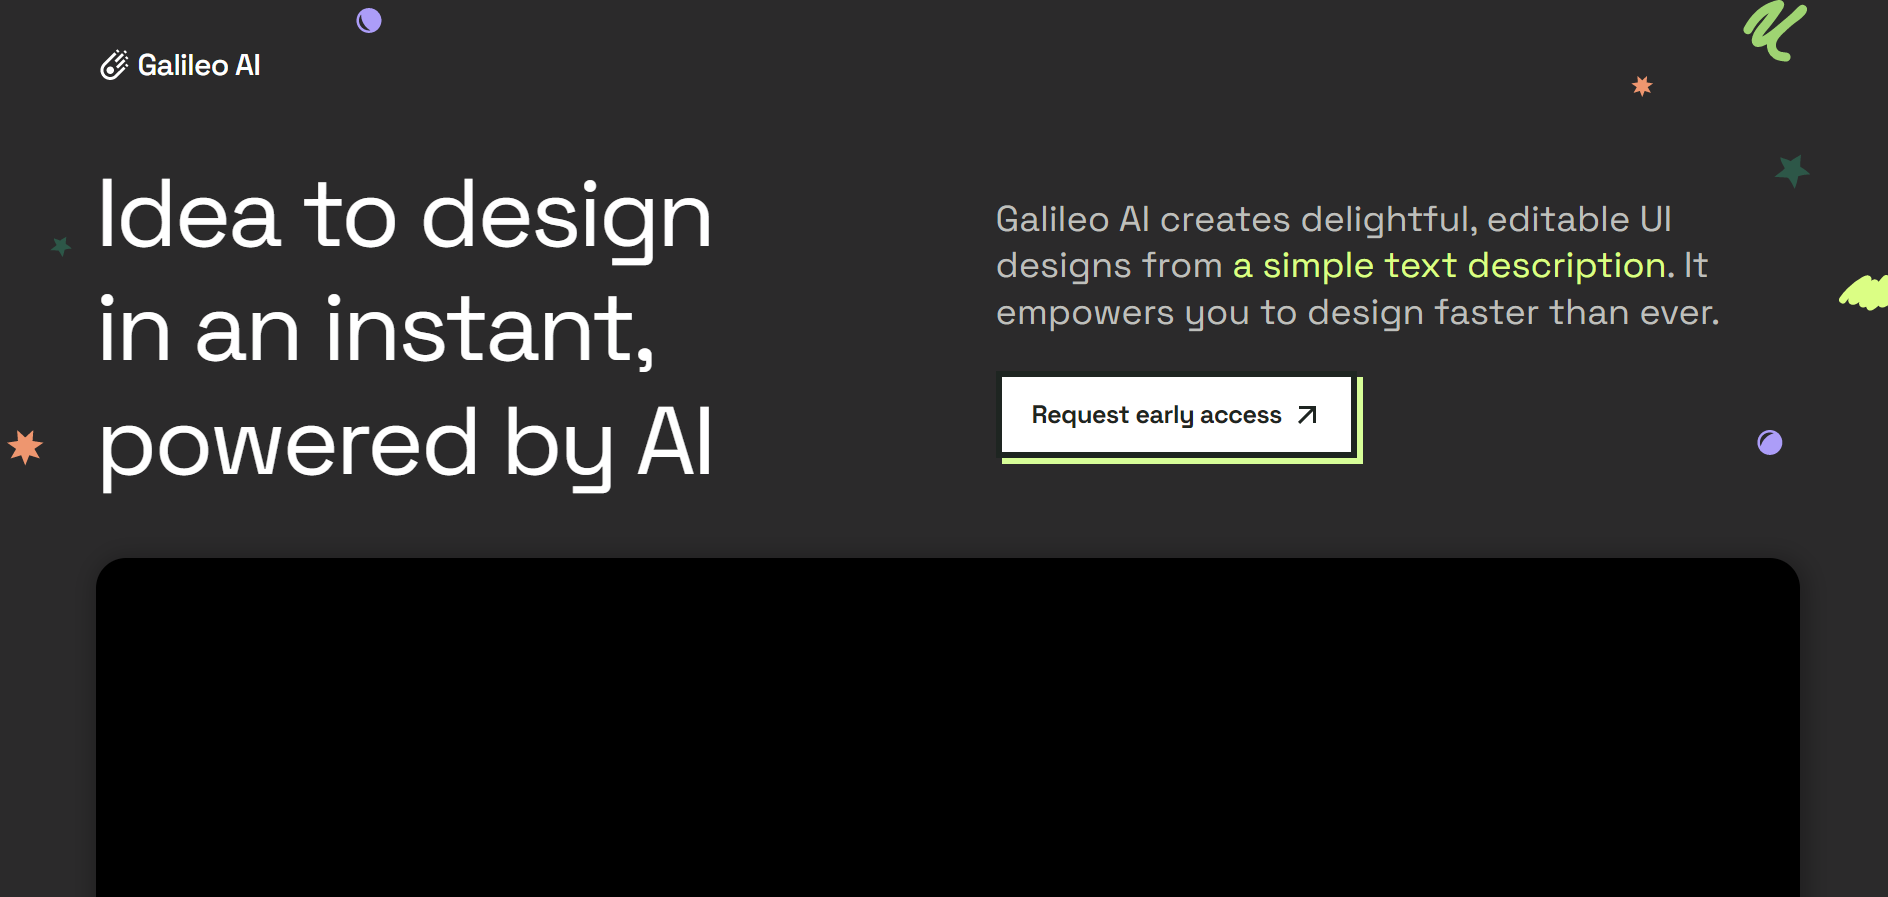 Design like a pro in seconds with Galileo AI – the ultimate UI design tool!